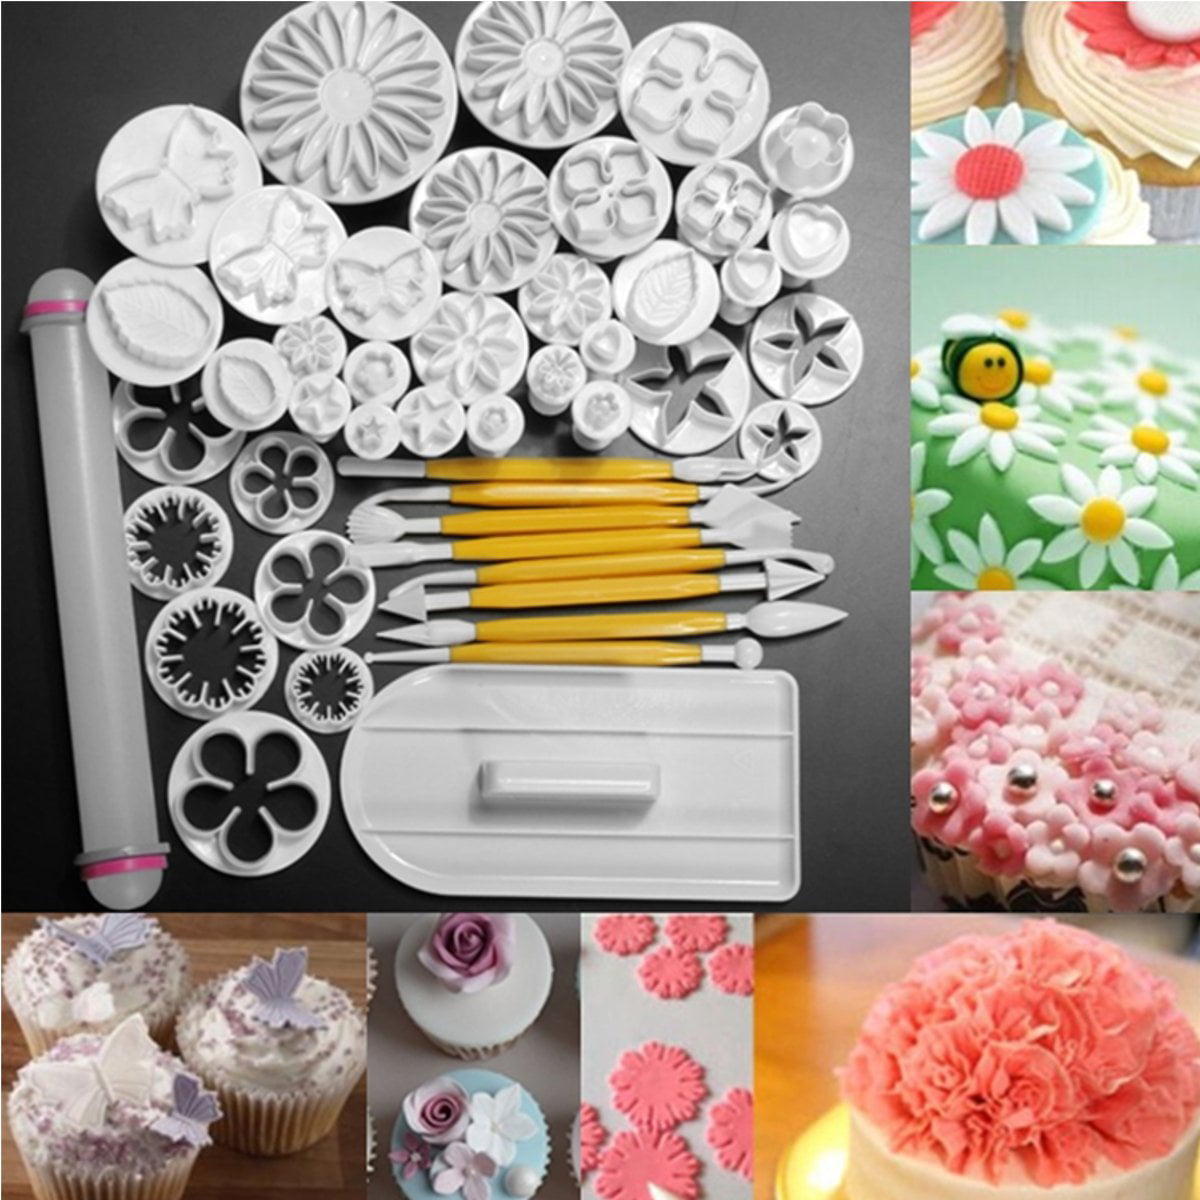 Details about   Cake Decorating Kit by Wellmax Complete Set of Baking Supplies with 24pc... 